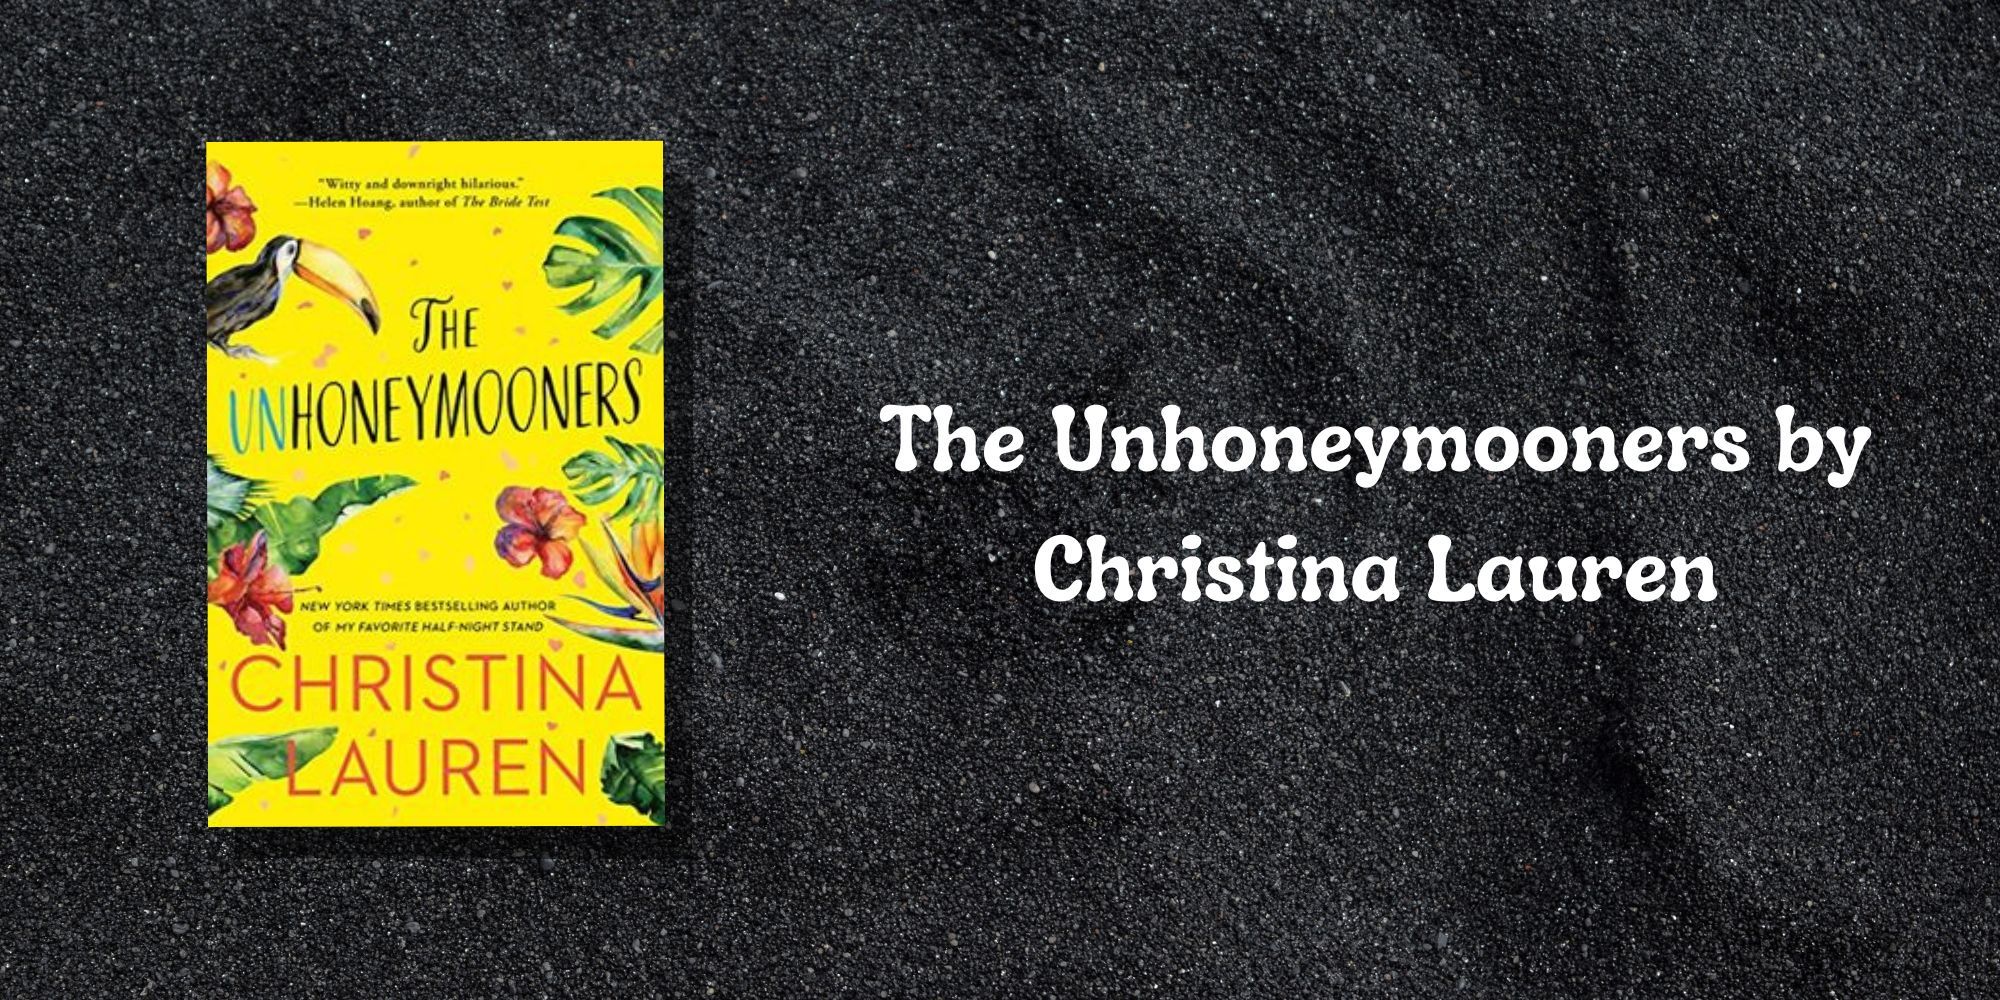 The cover of The Unhoneymooners by Christina Lauren